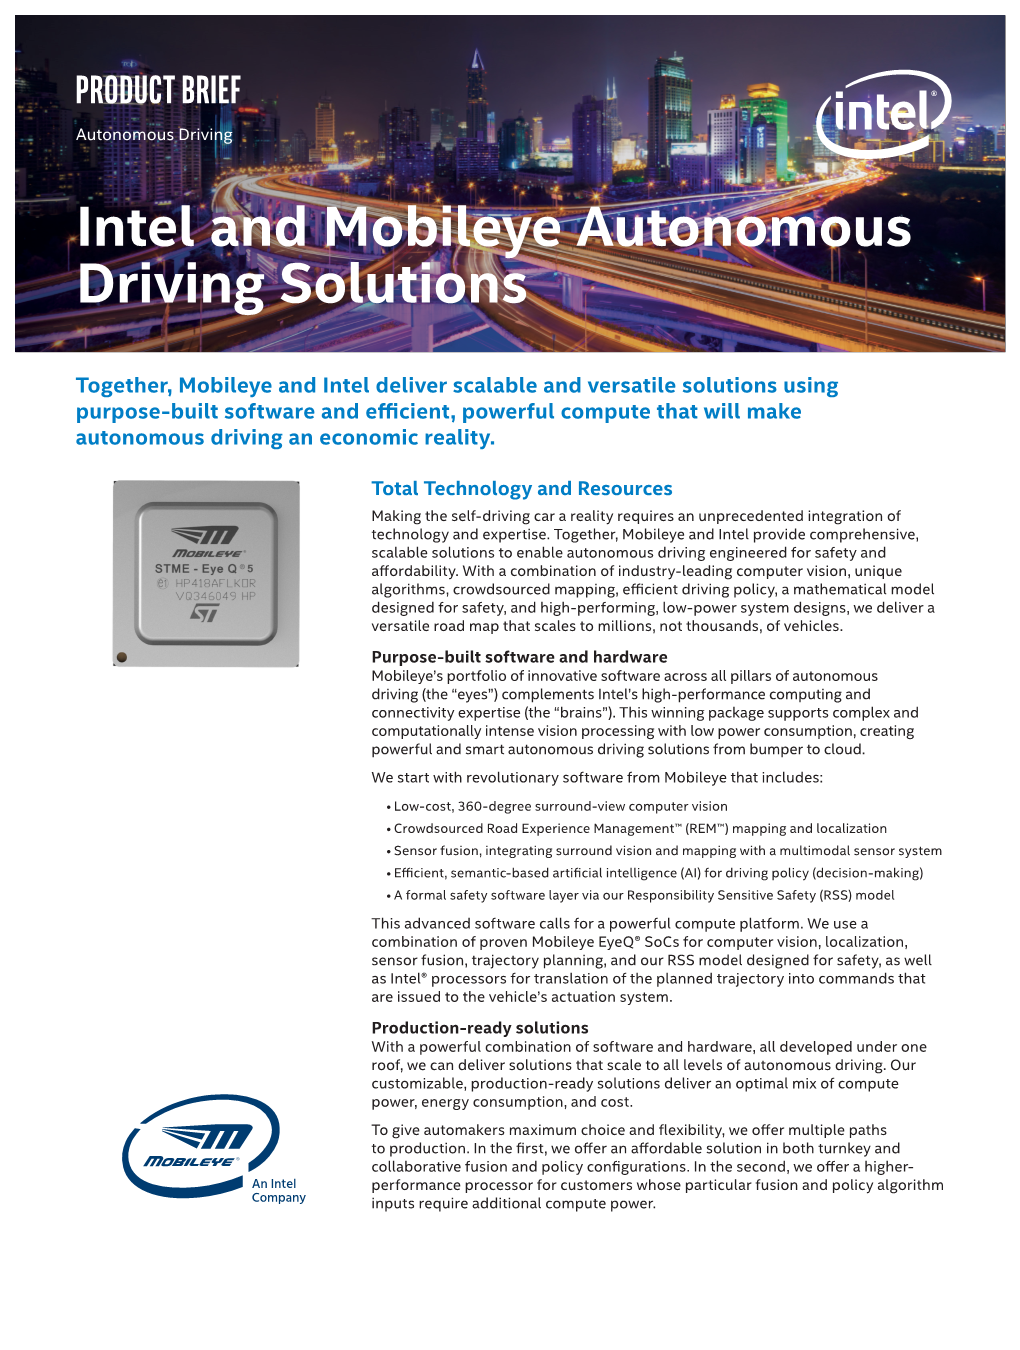 Intel and Mobileye Autonomous Driving Solutions